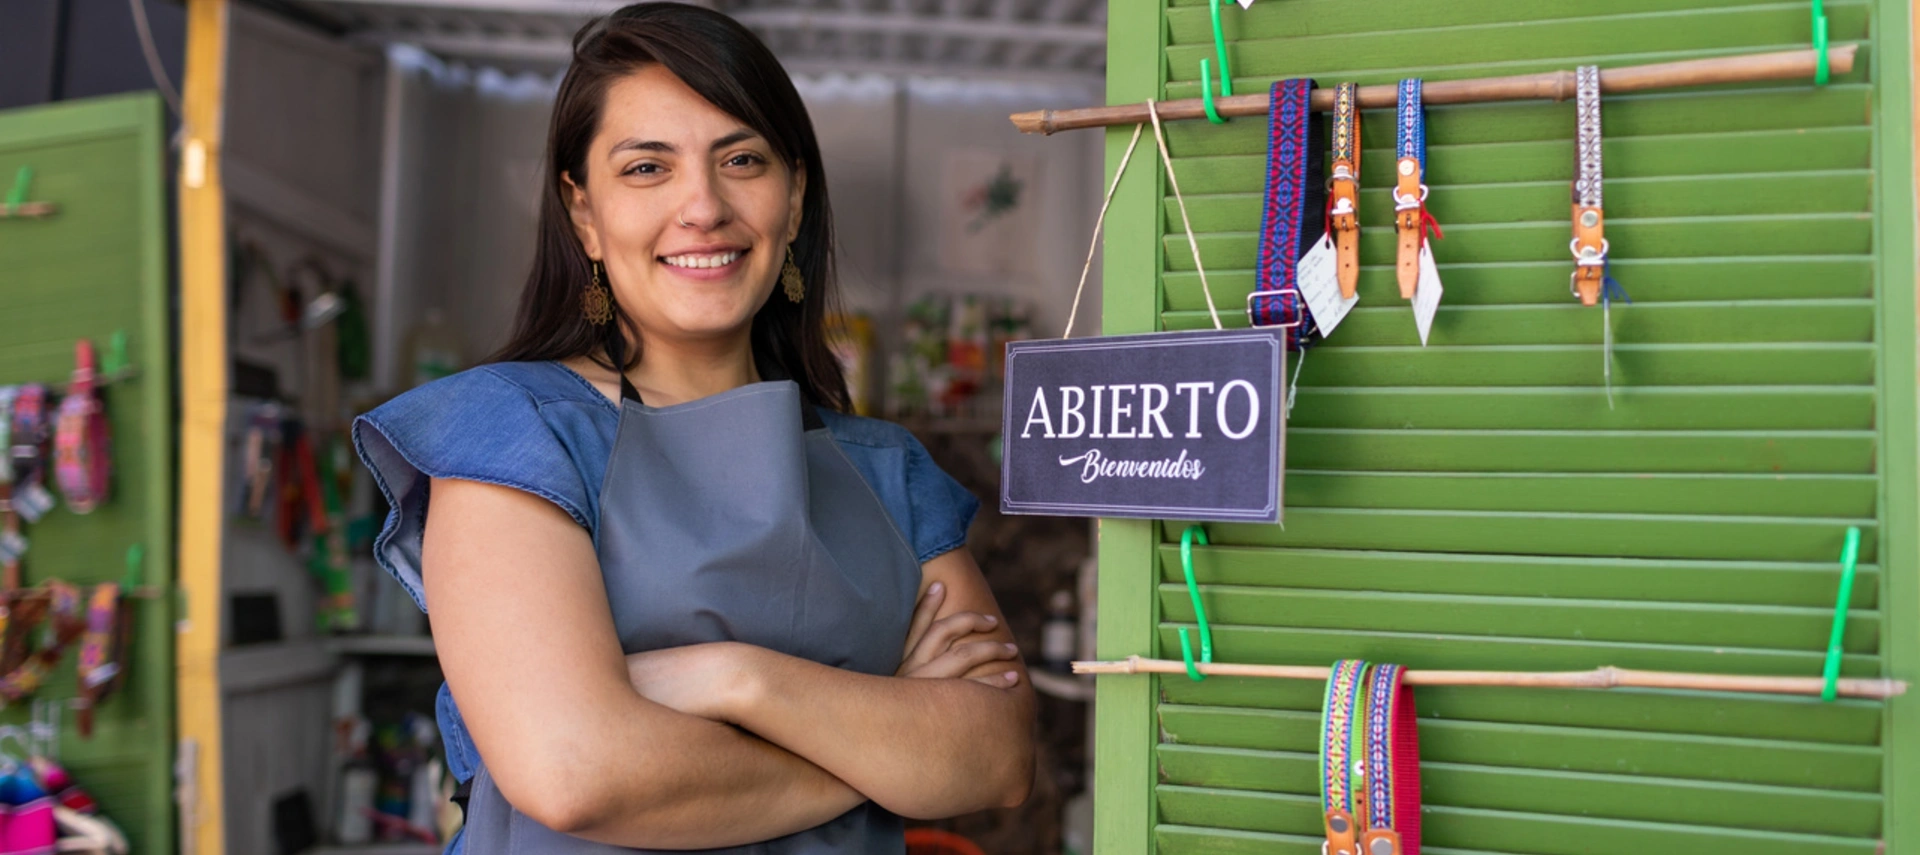 Small business owner in Paraguay